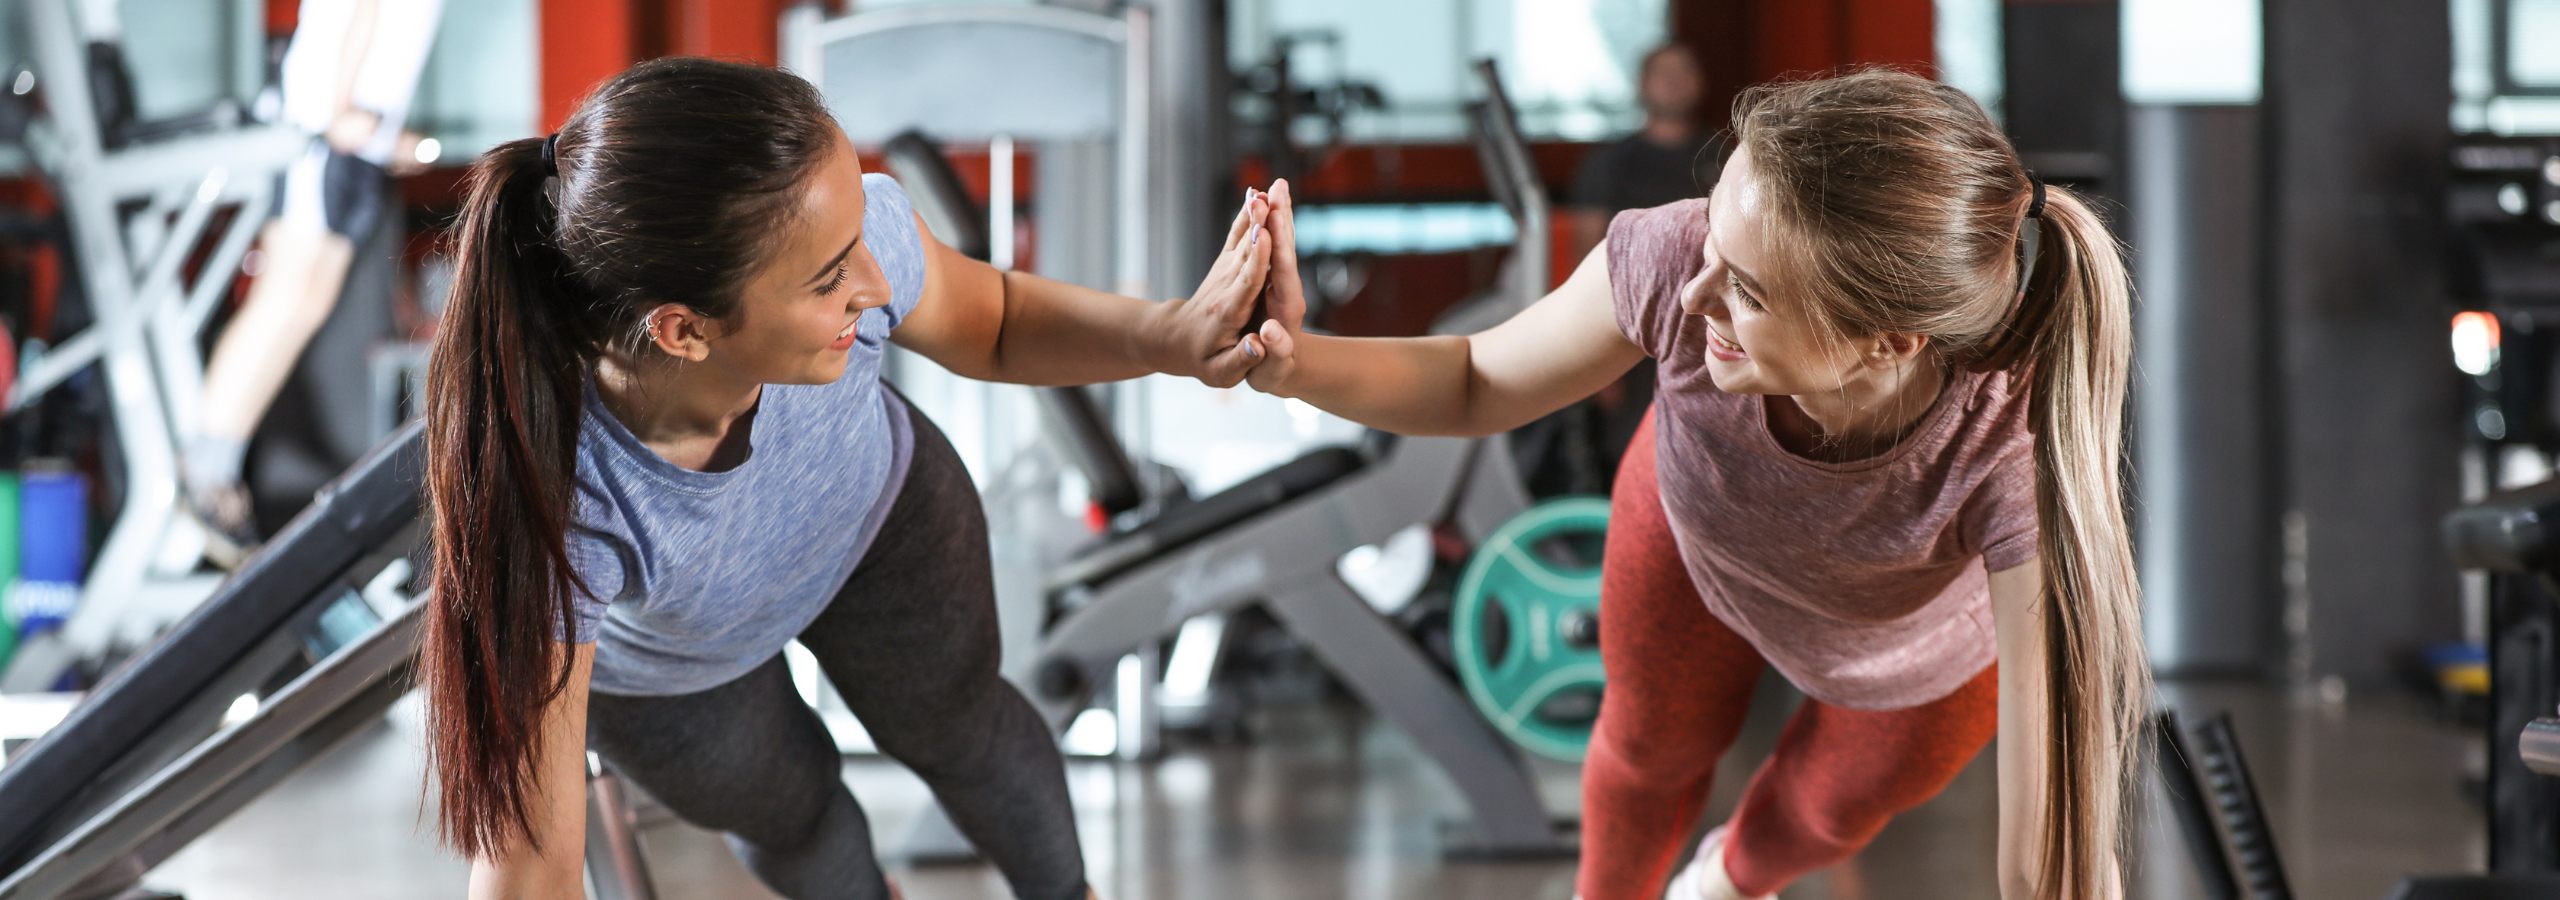 6 Benefits of Joining a Gym With a Friend - DeakinACTIVE